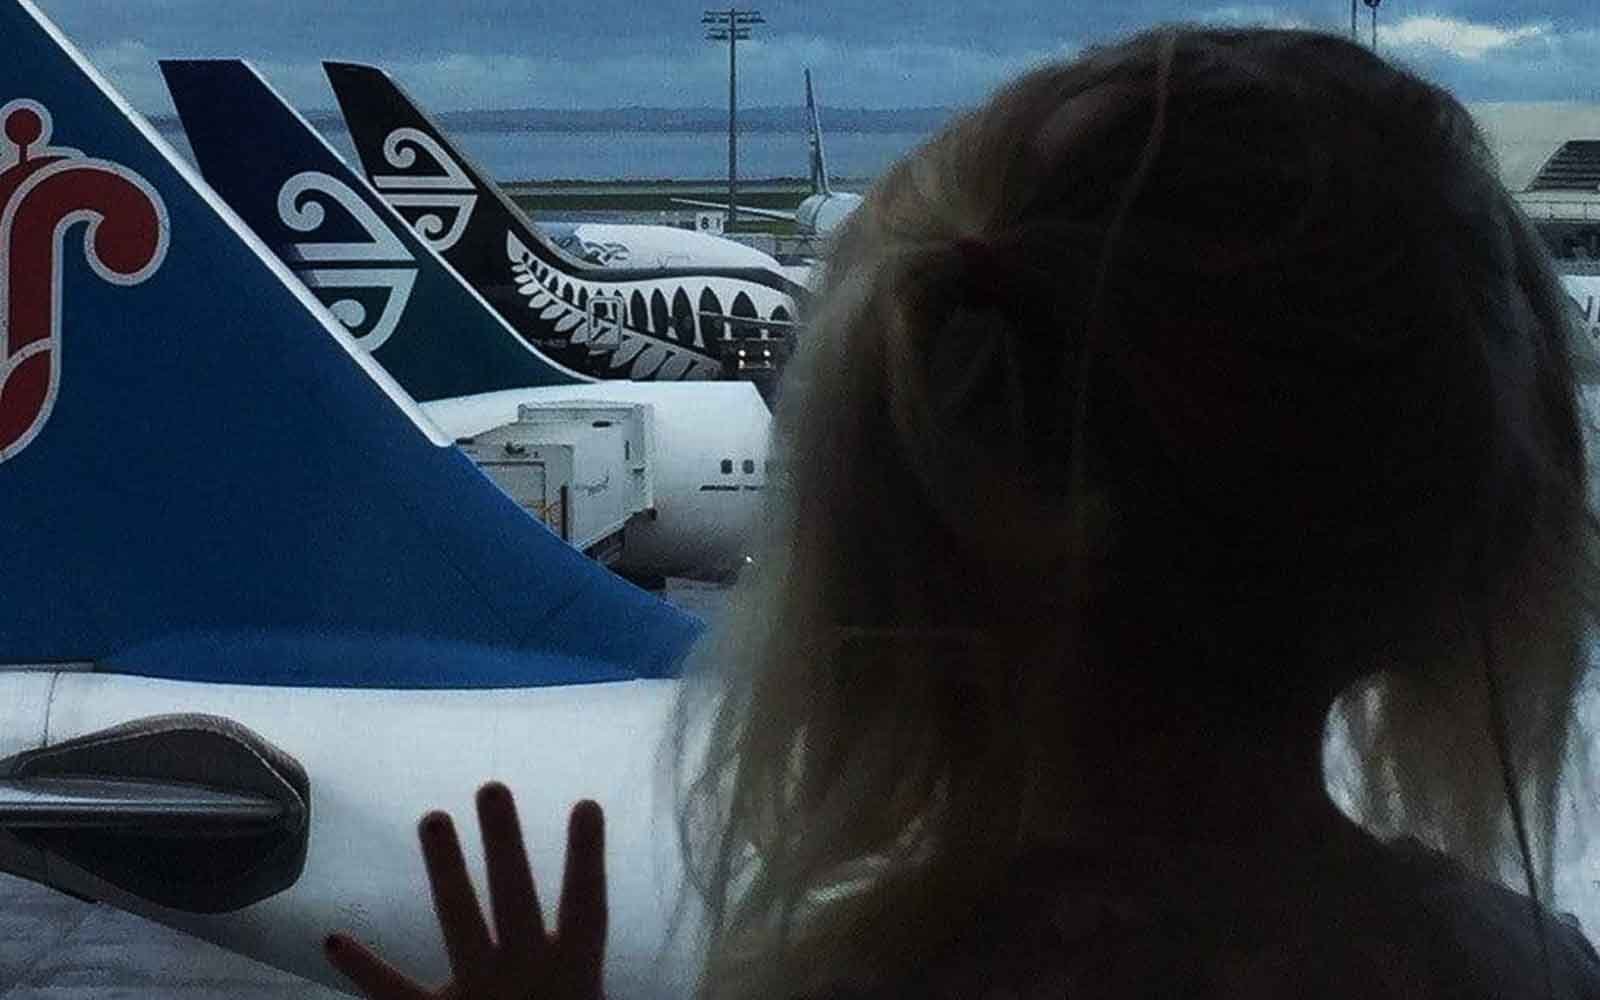 Surviving air travel with your little ones